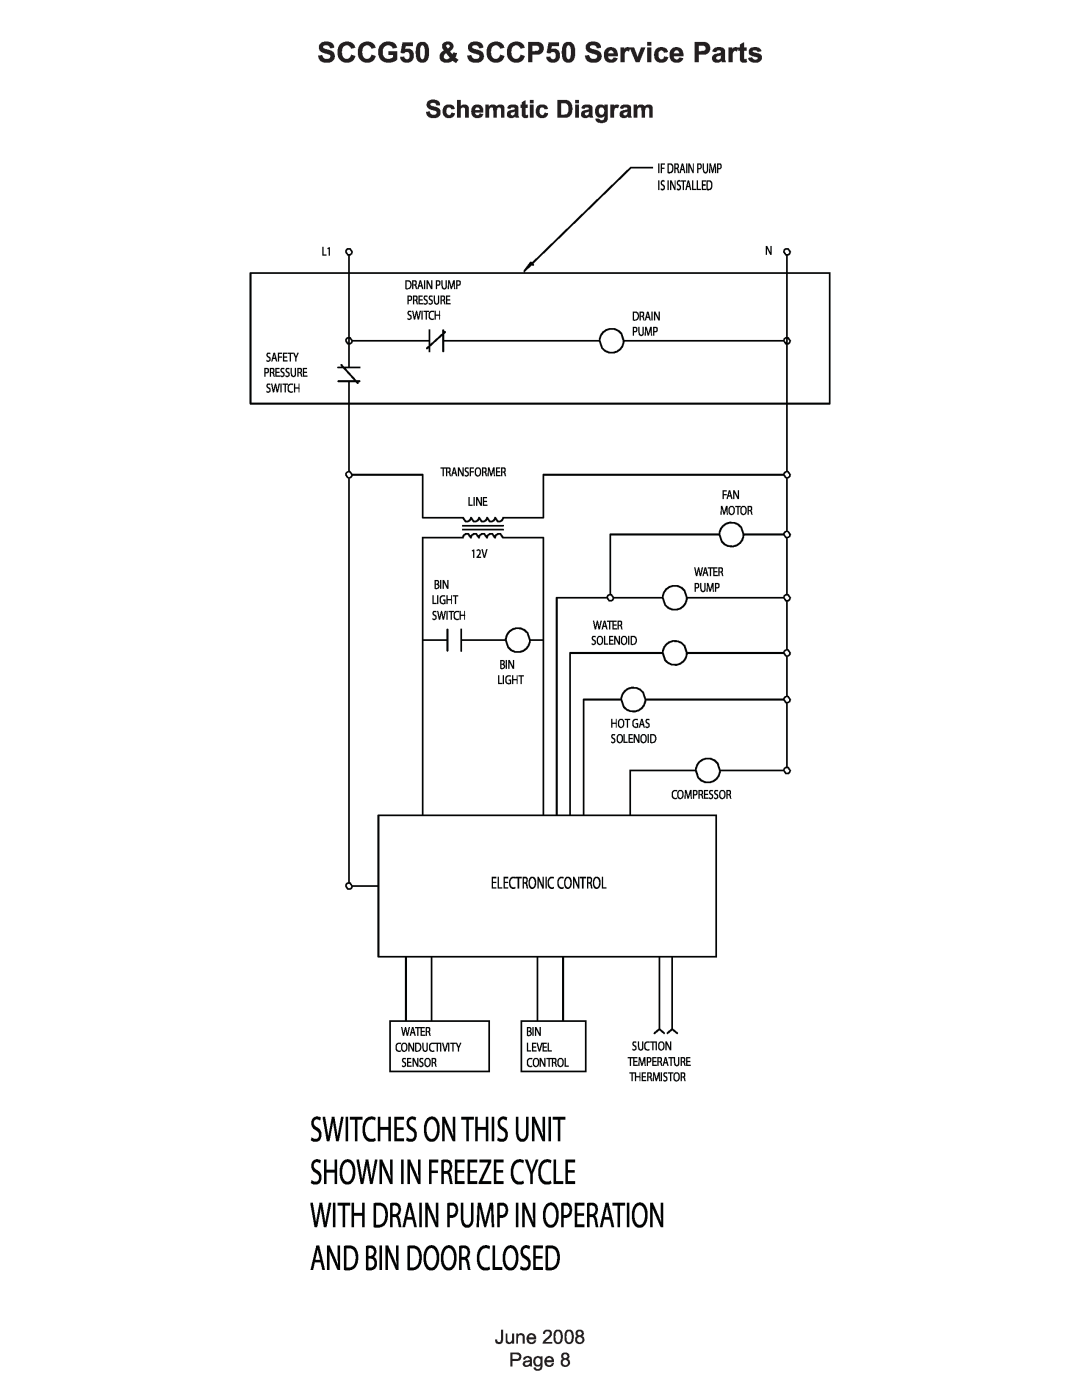 Scotsman Ice SCC50 manual Schematic Diagram, Switches On This Unit Shown In Freeze Cycle, SCCG50 & SCCP50 Service Parts 